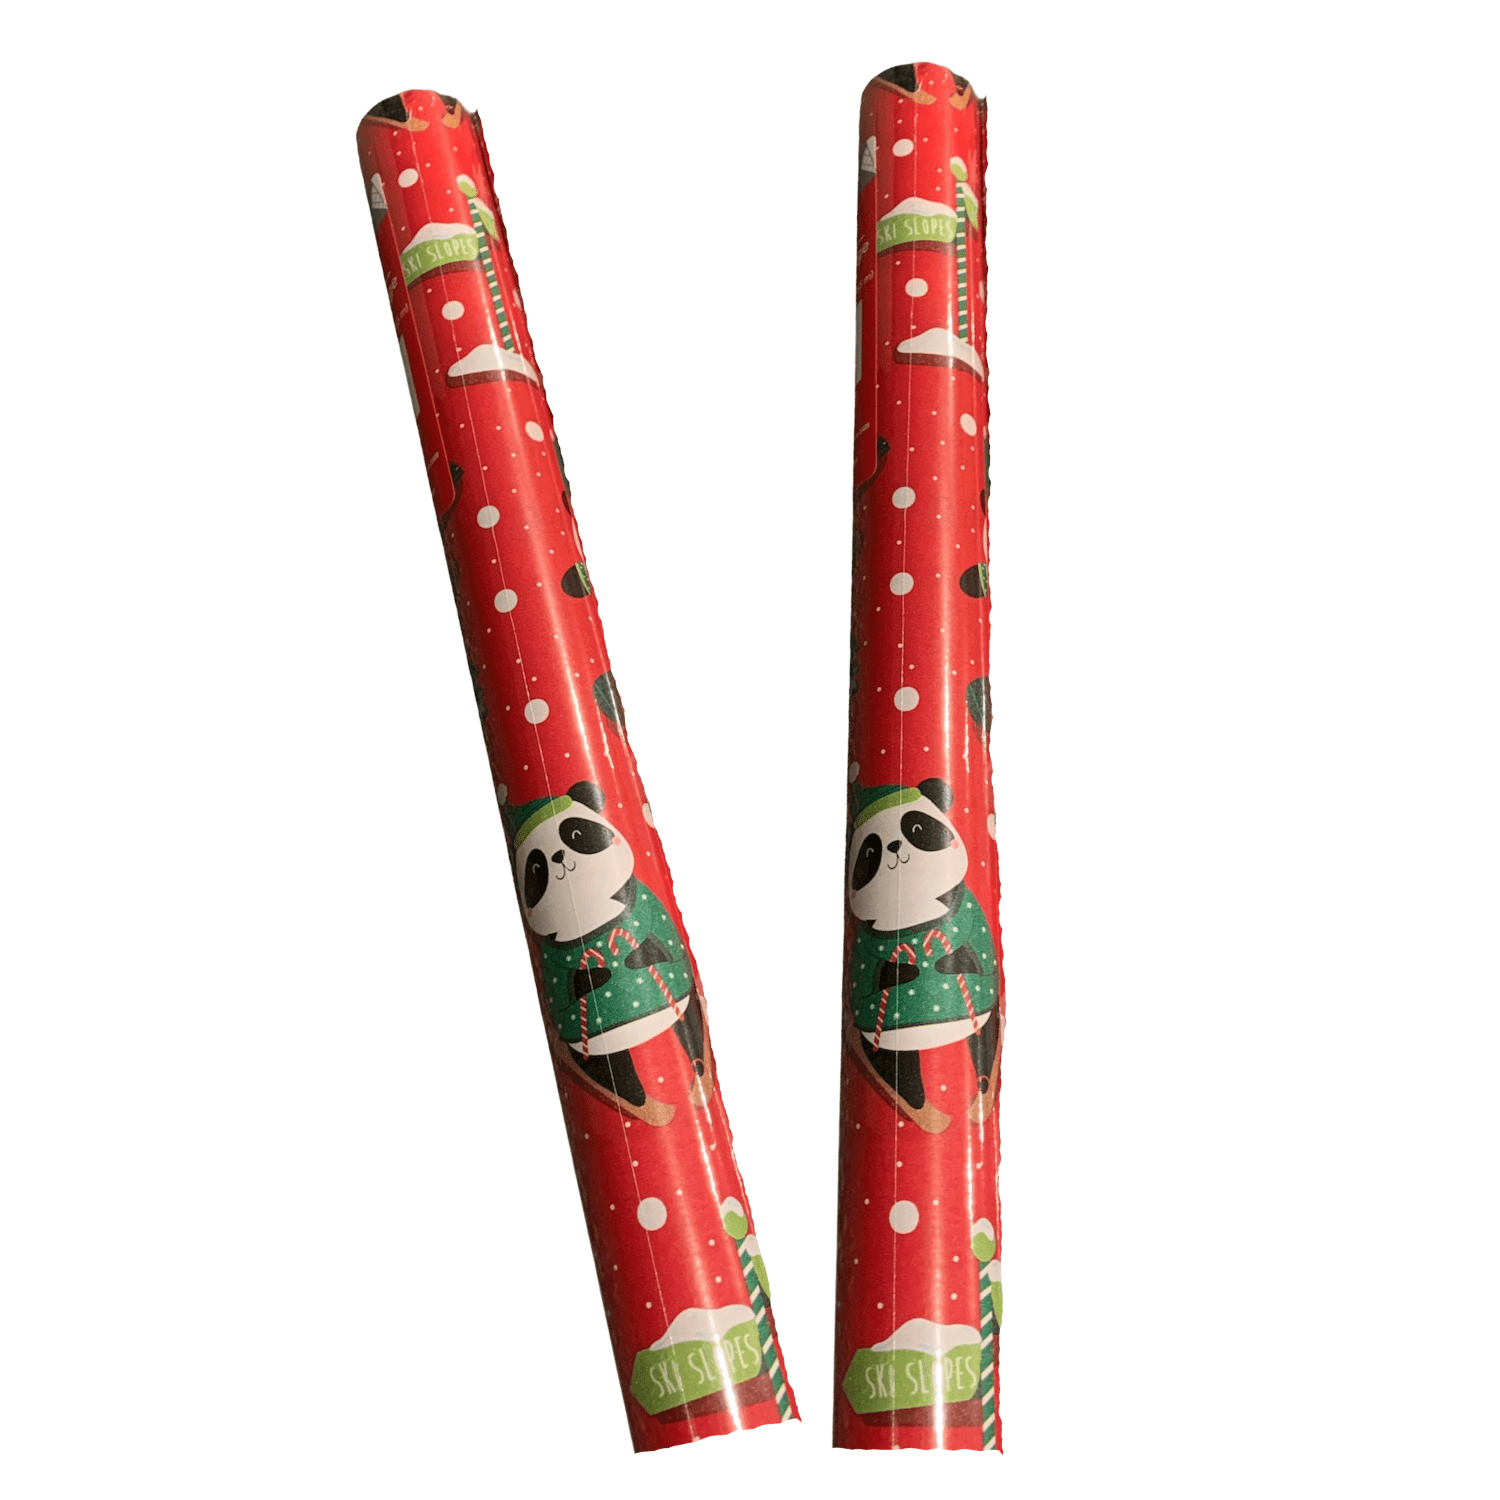 Rust Merry Christmas Pattern Wrapping Paper Sheets Each Sheet 20x29 Holiday  Cozy Wrap Gift Present Roll Kids Cute Red 